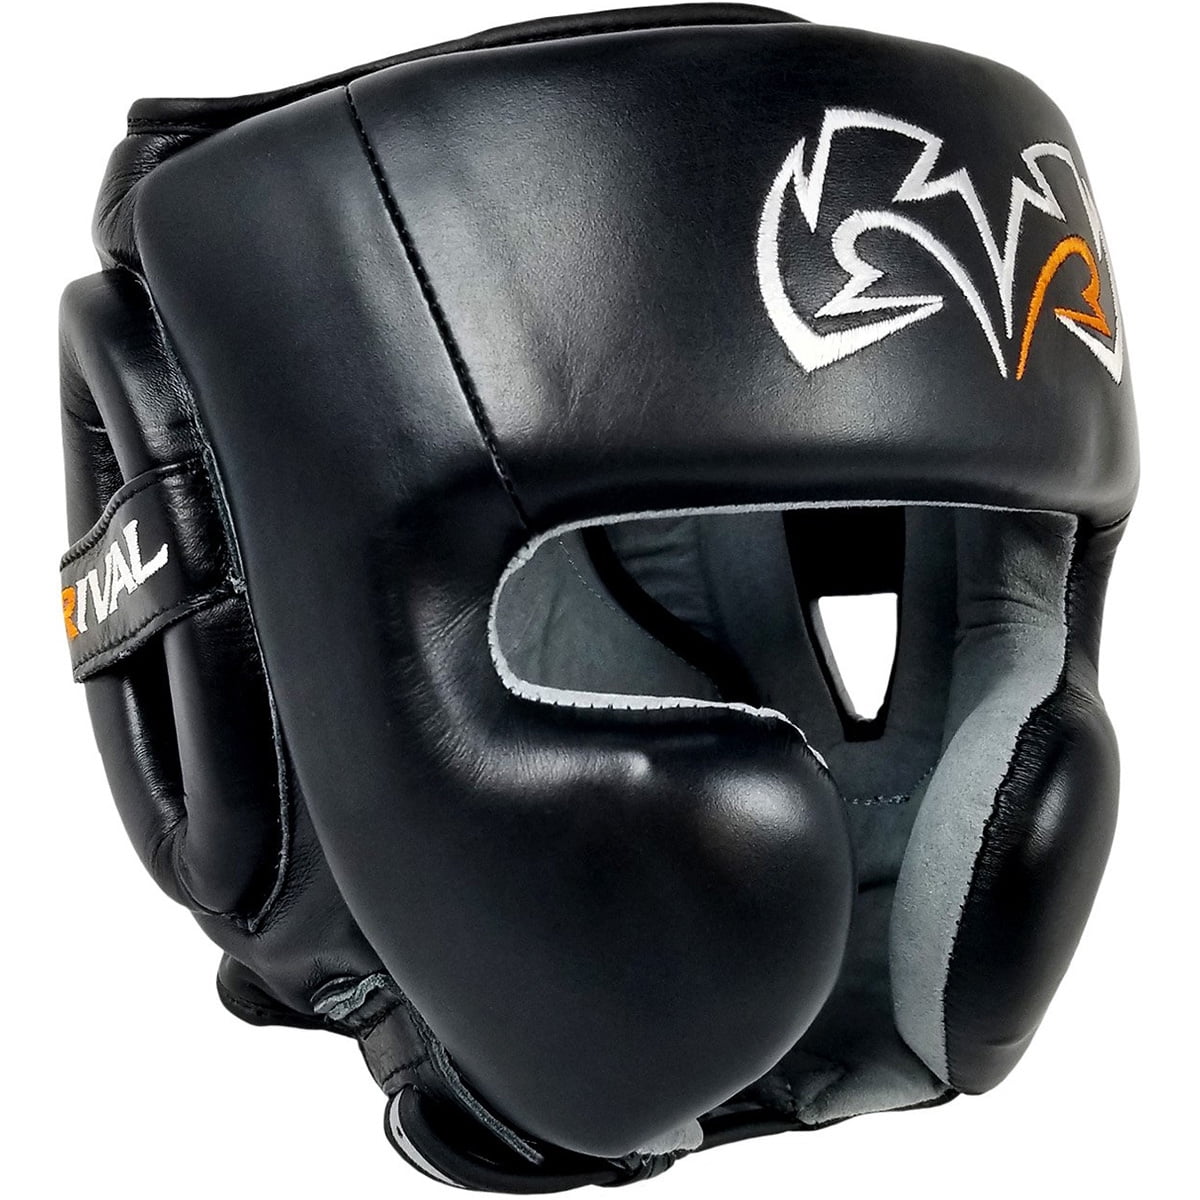 Black/Red Rival Boxing RHG20 Training Headgear with Cheek Protectors 